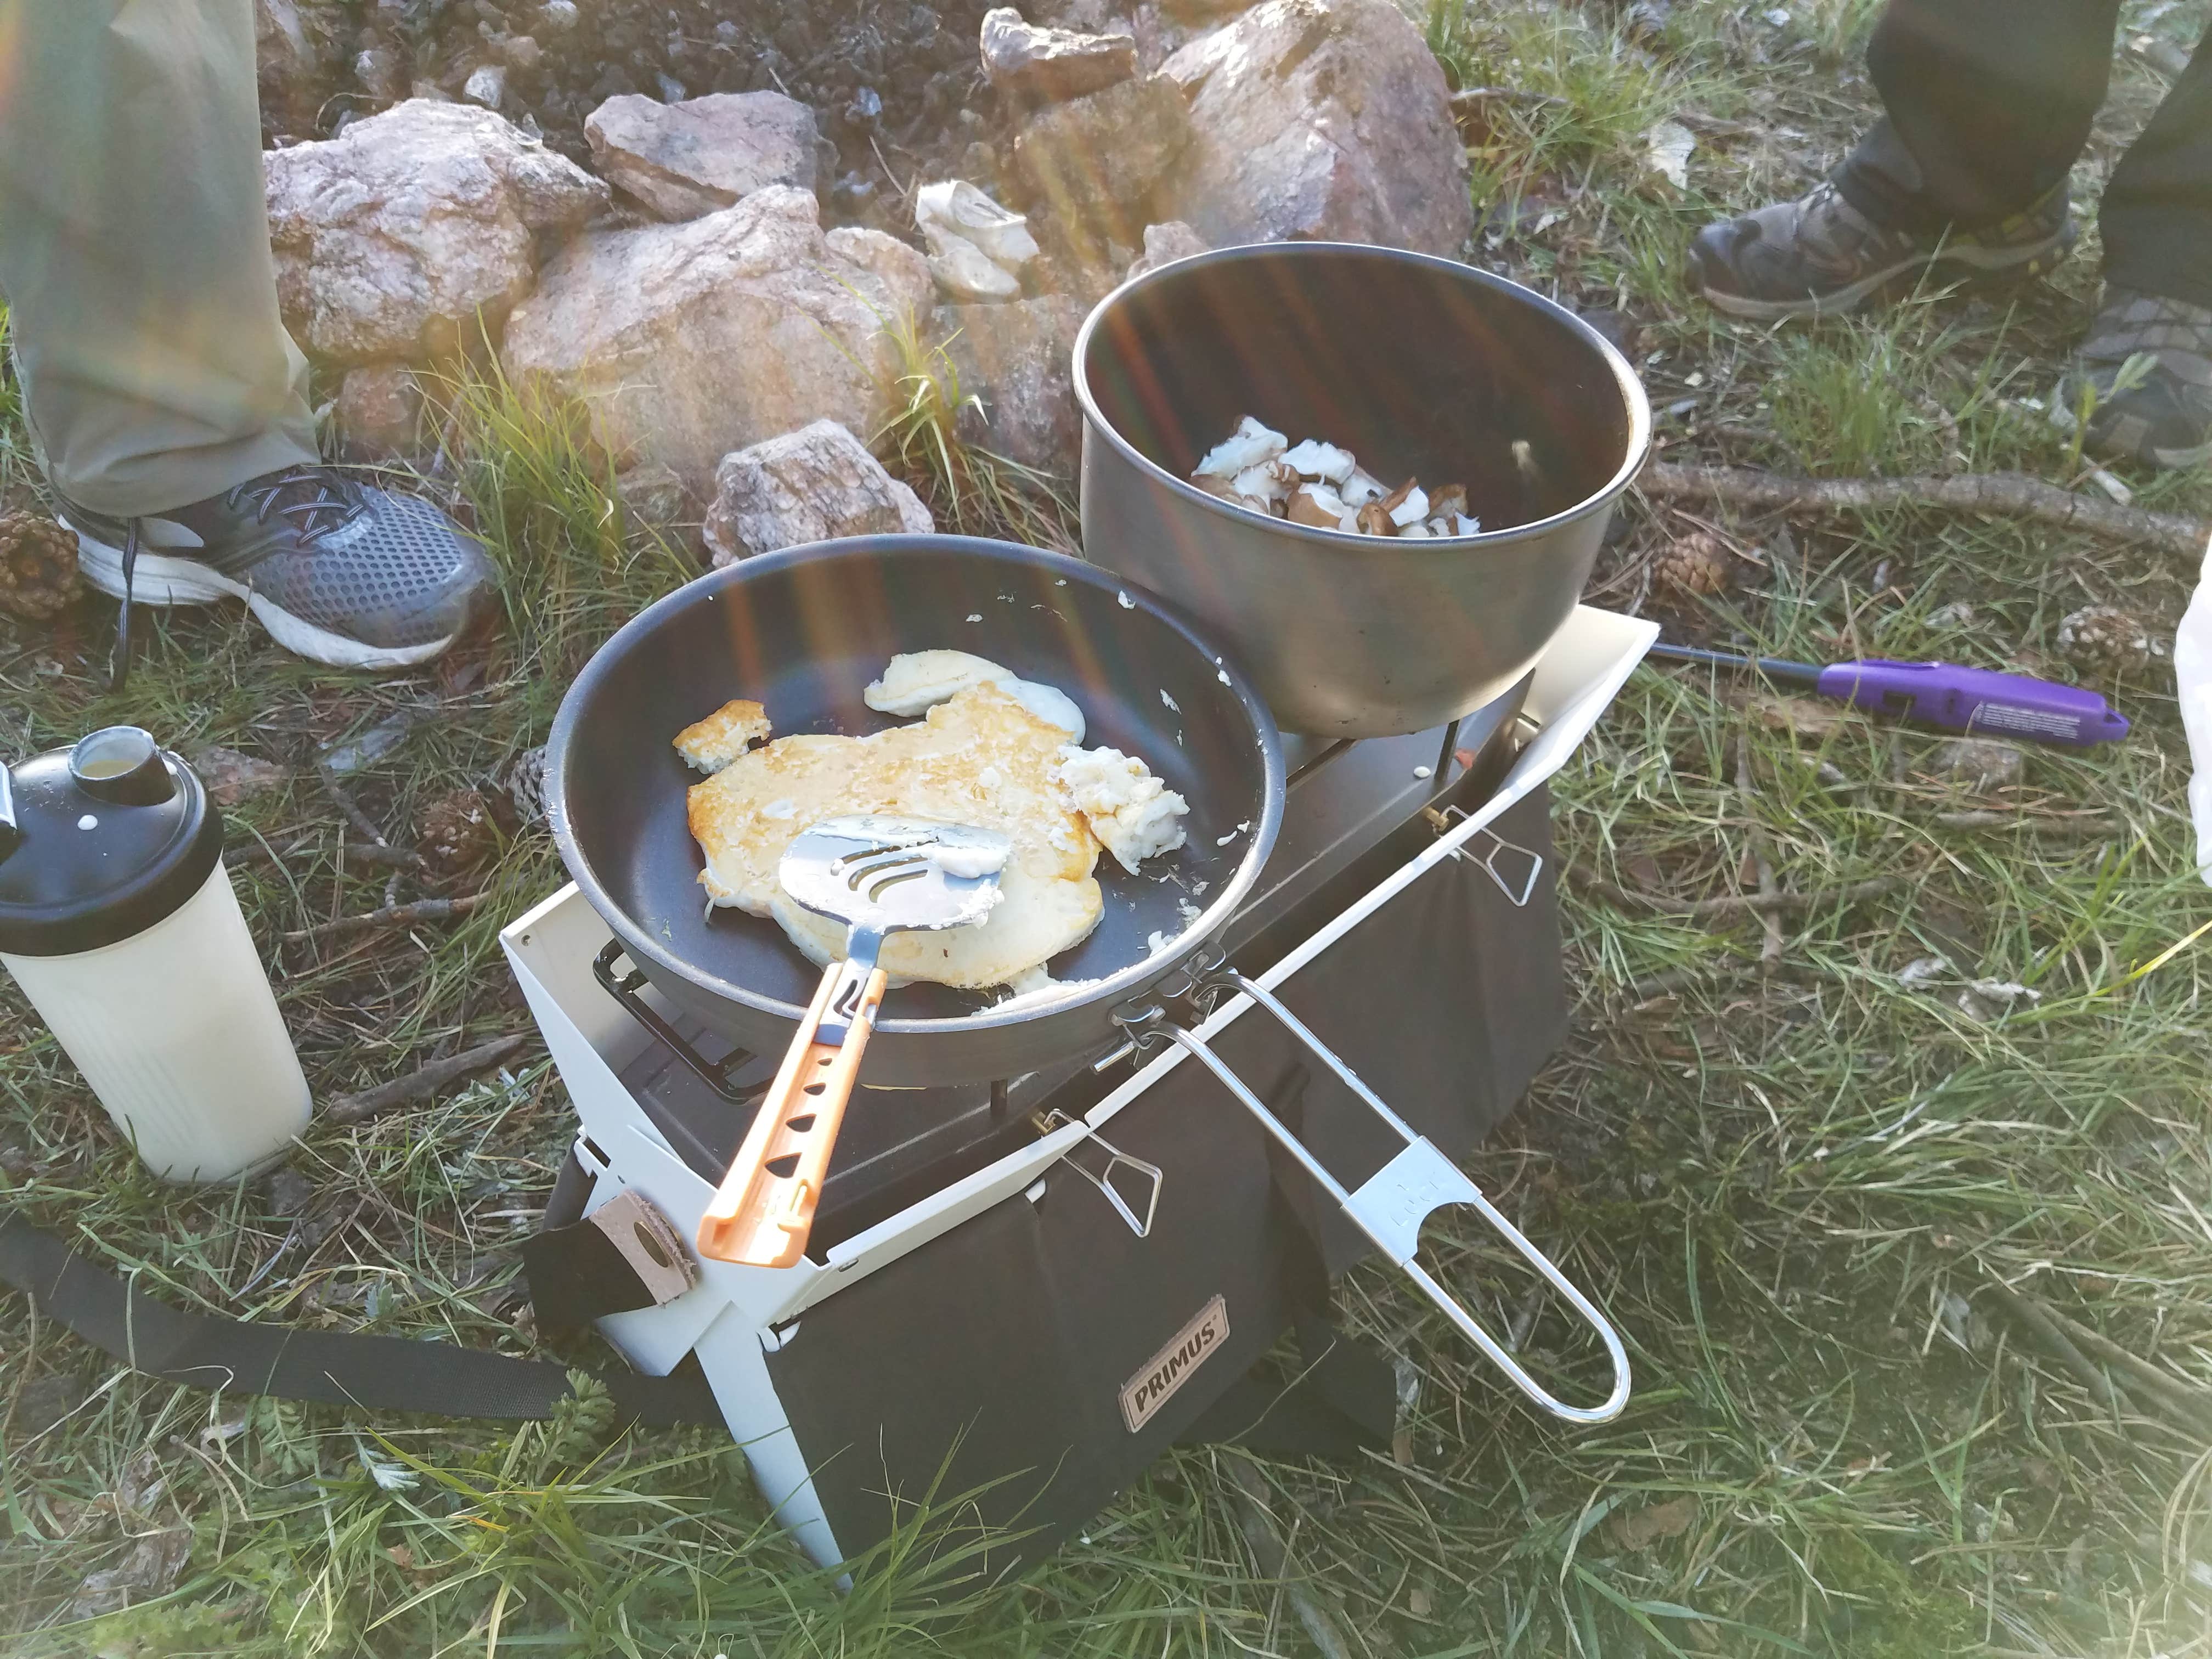 Using the ONJA stove the next AM for some pancakes!